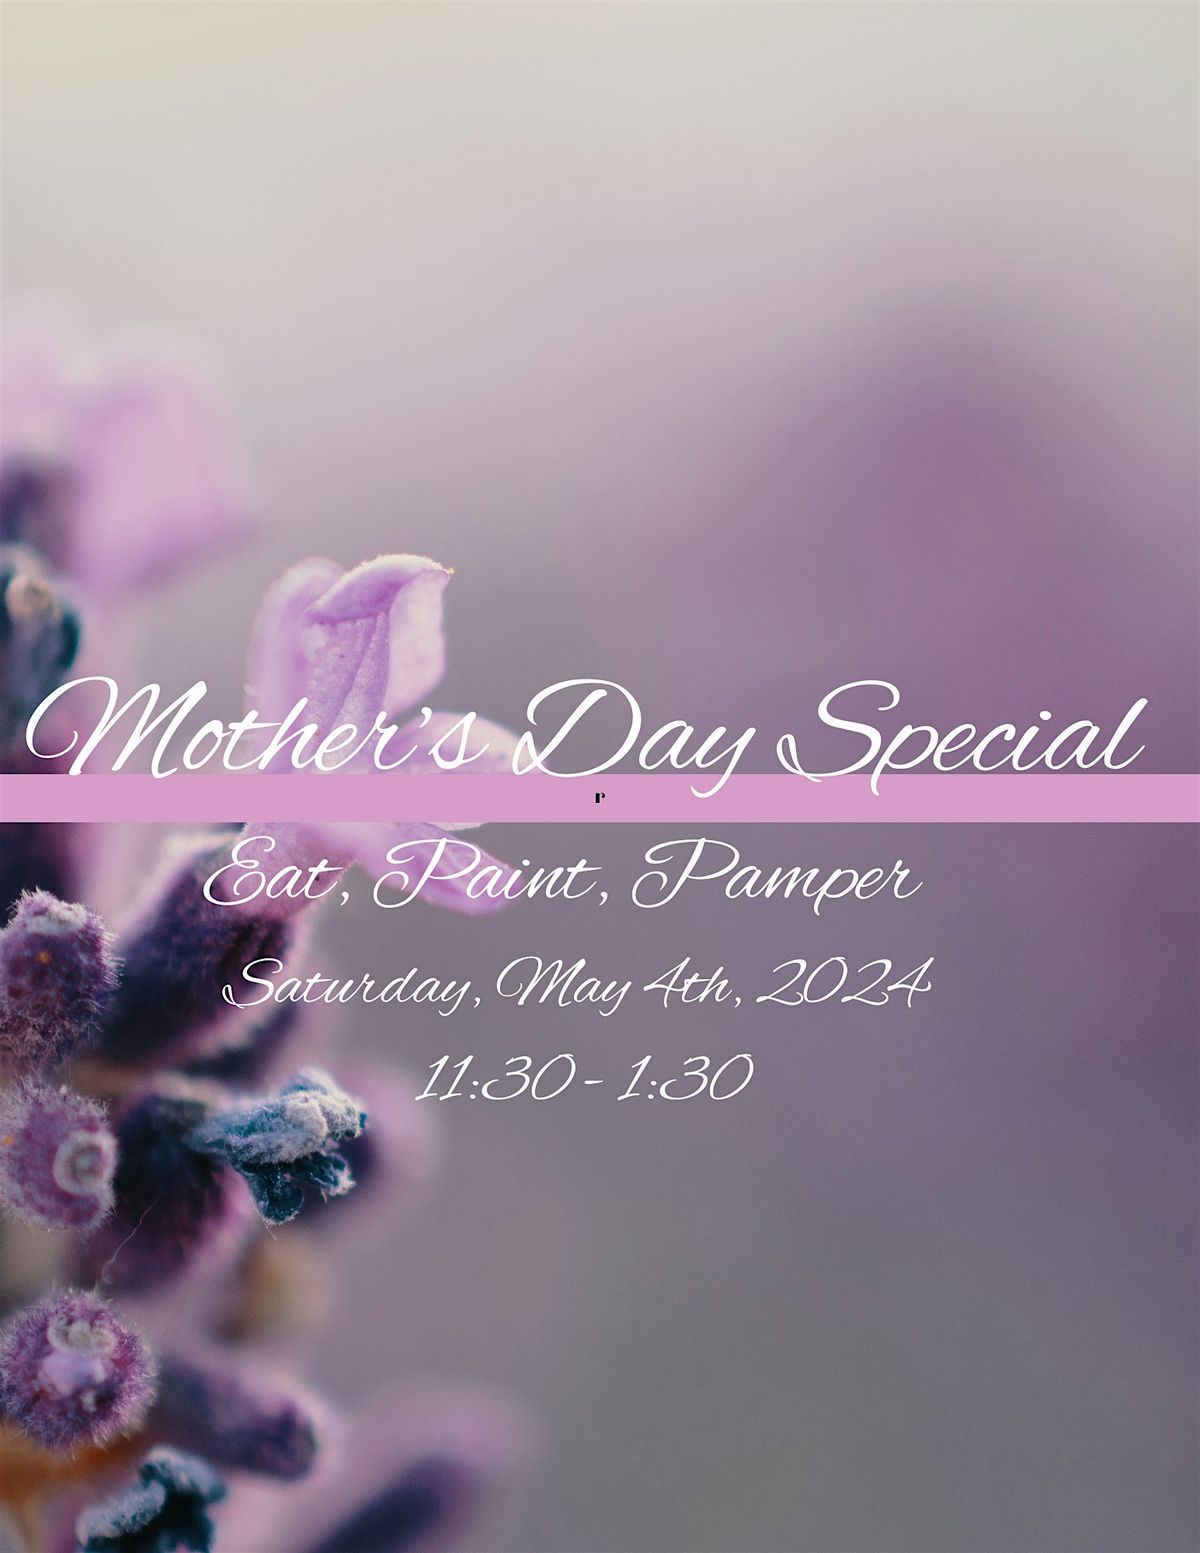 Special Mother's Day (inspirational woman's) Event